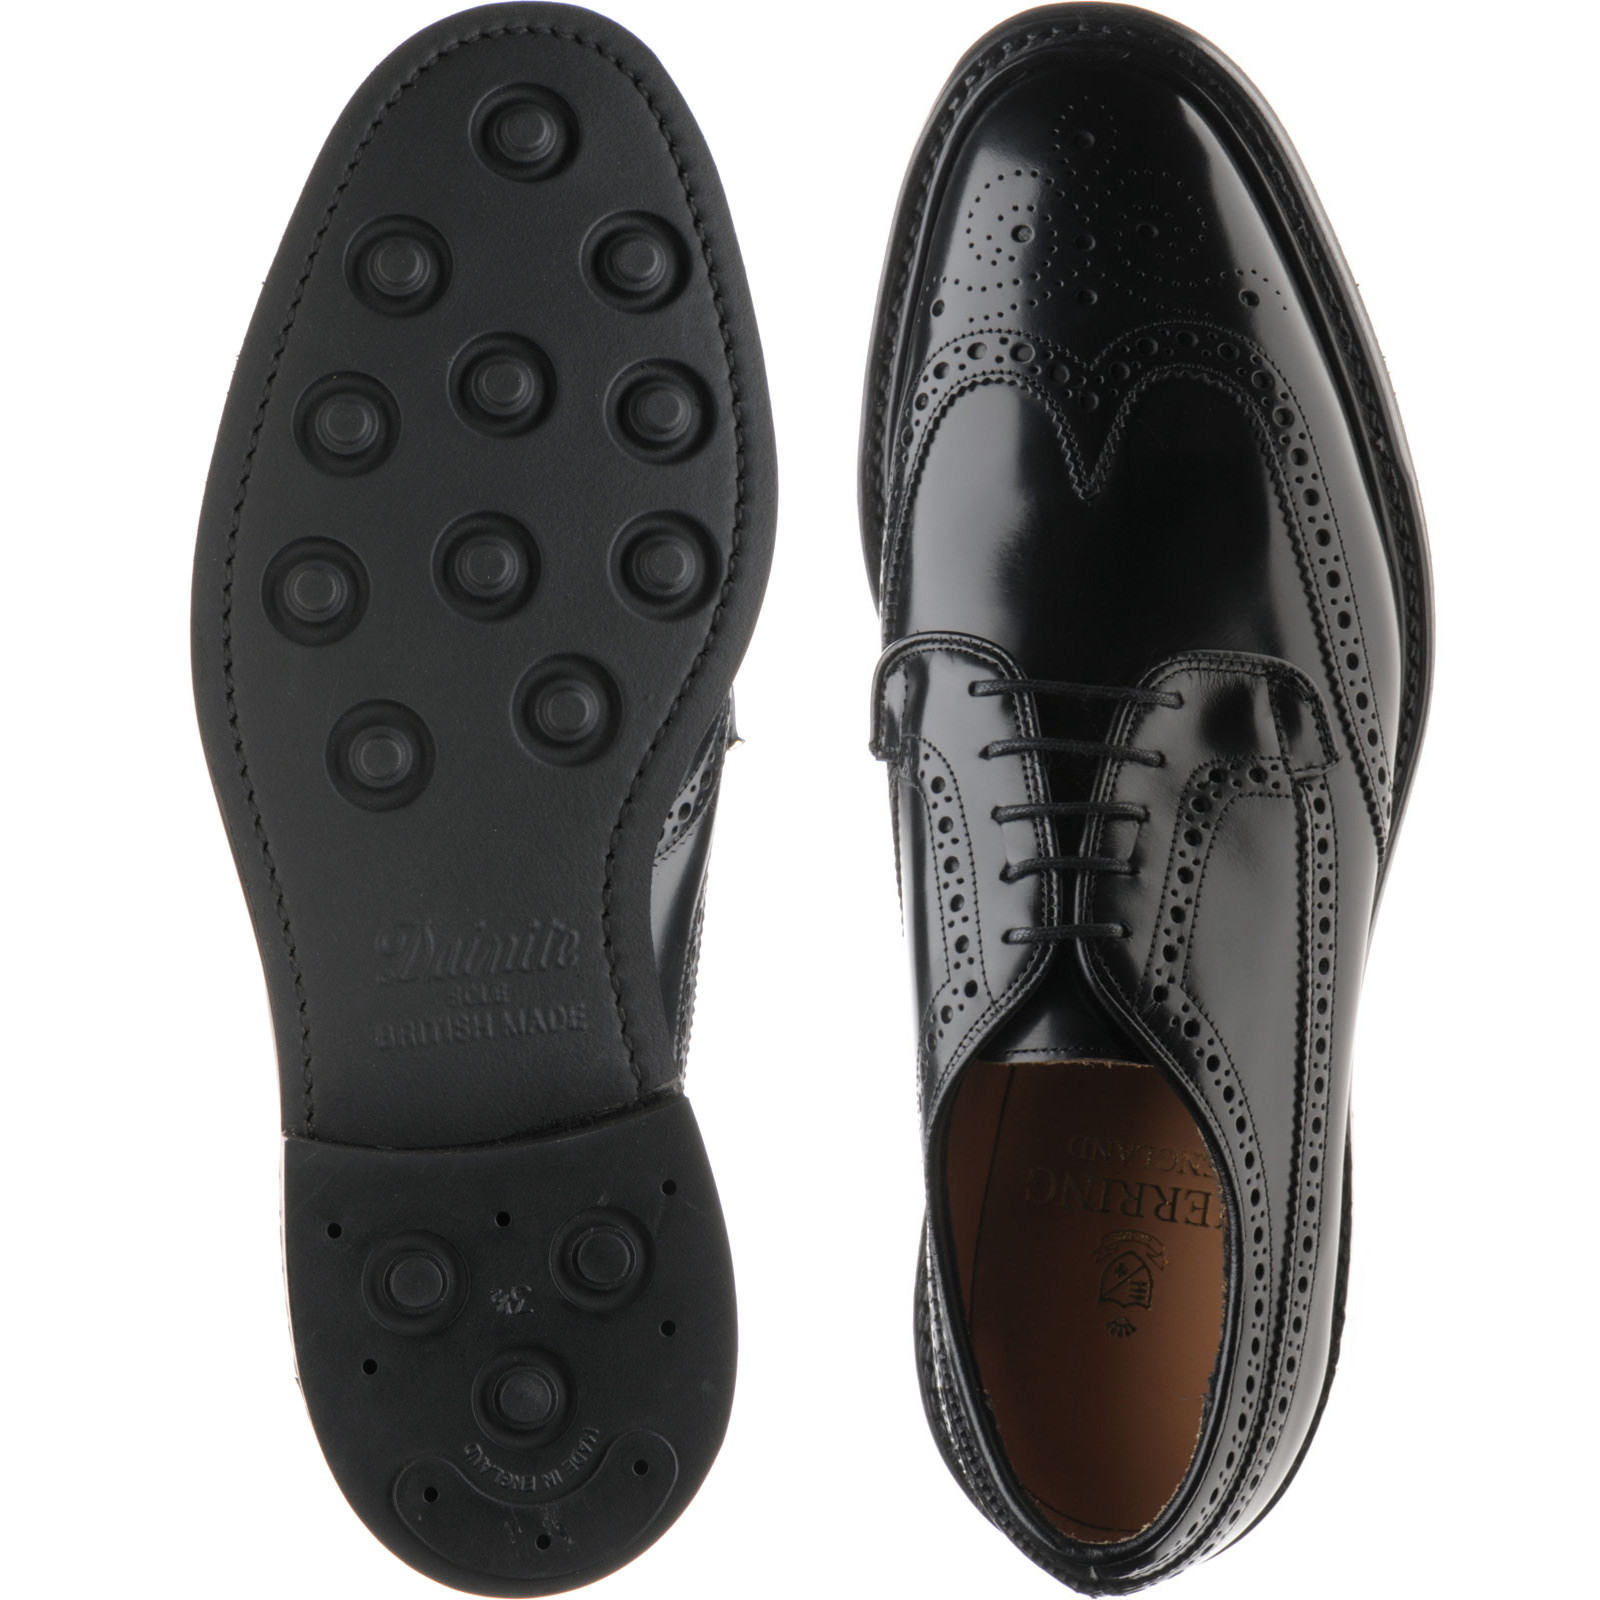 Herring shoes | Herring Premier | Canning II (Rubber) rubber-soled ...